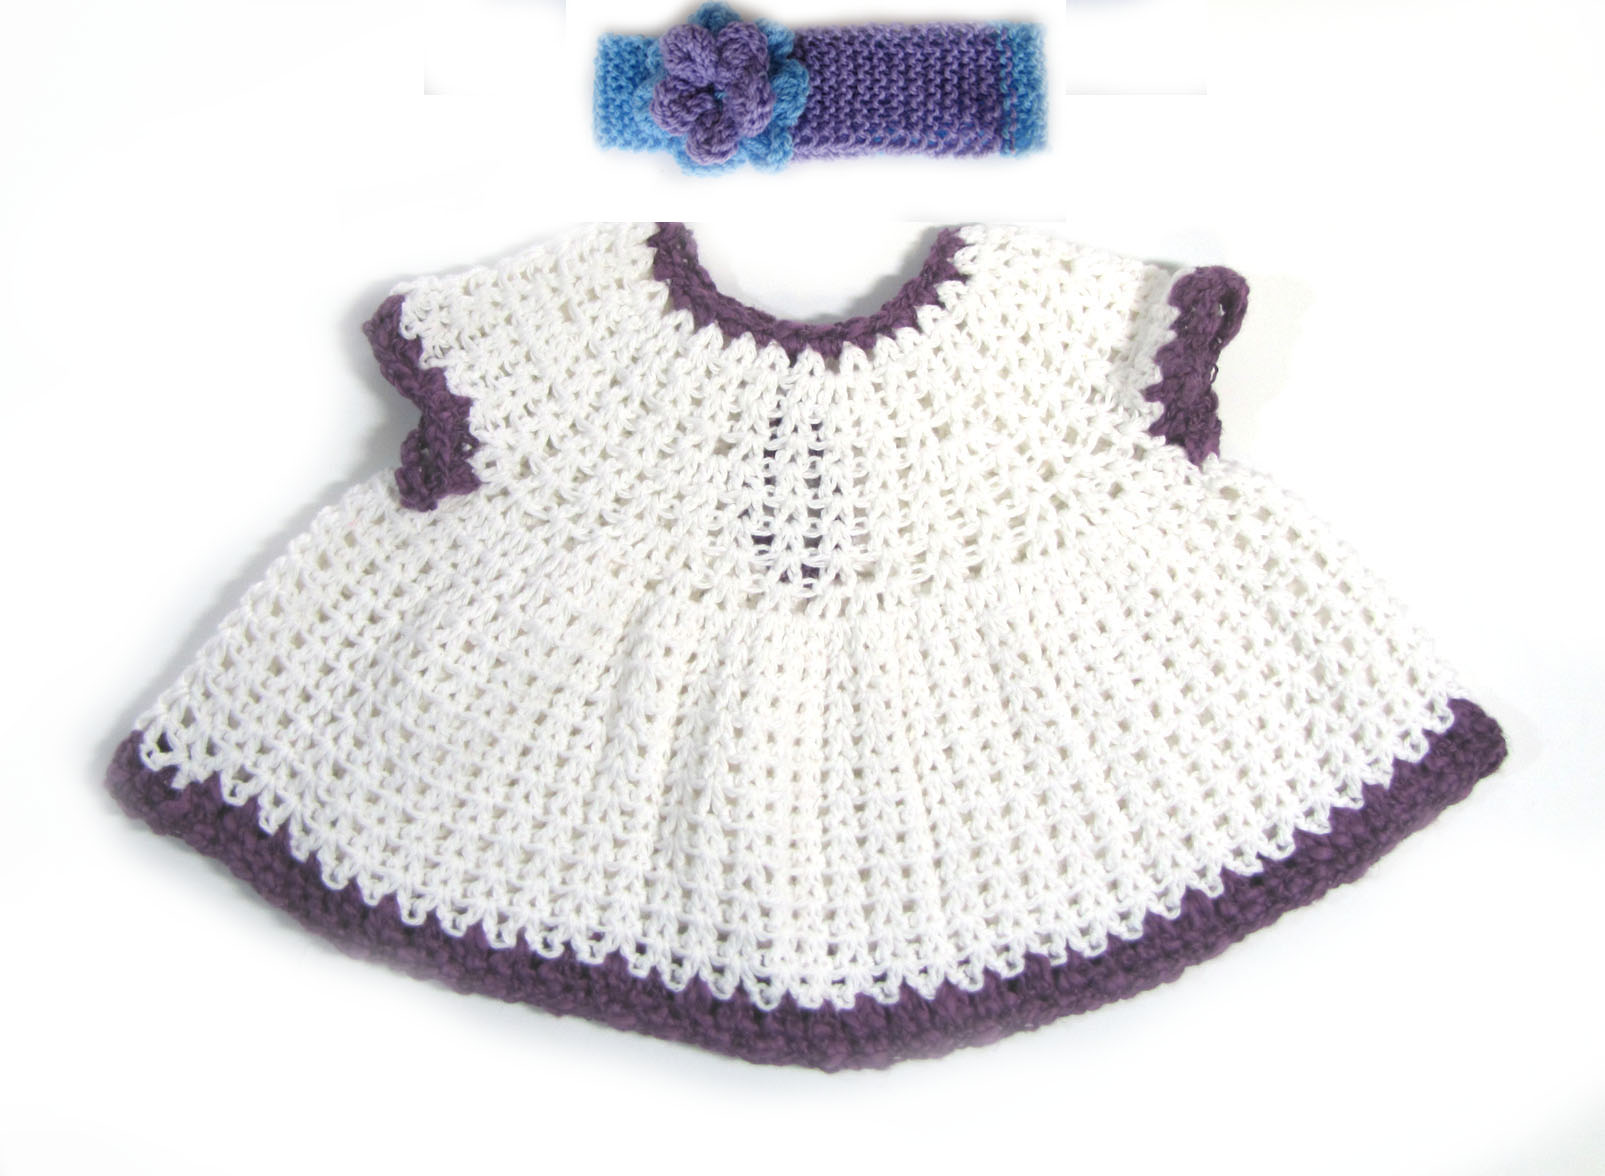 KSS Baby Crocheted White/Purple Cotton Dress 3 Months DR-156-HB-169 - Click Image to Close